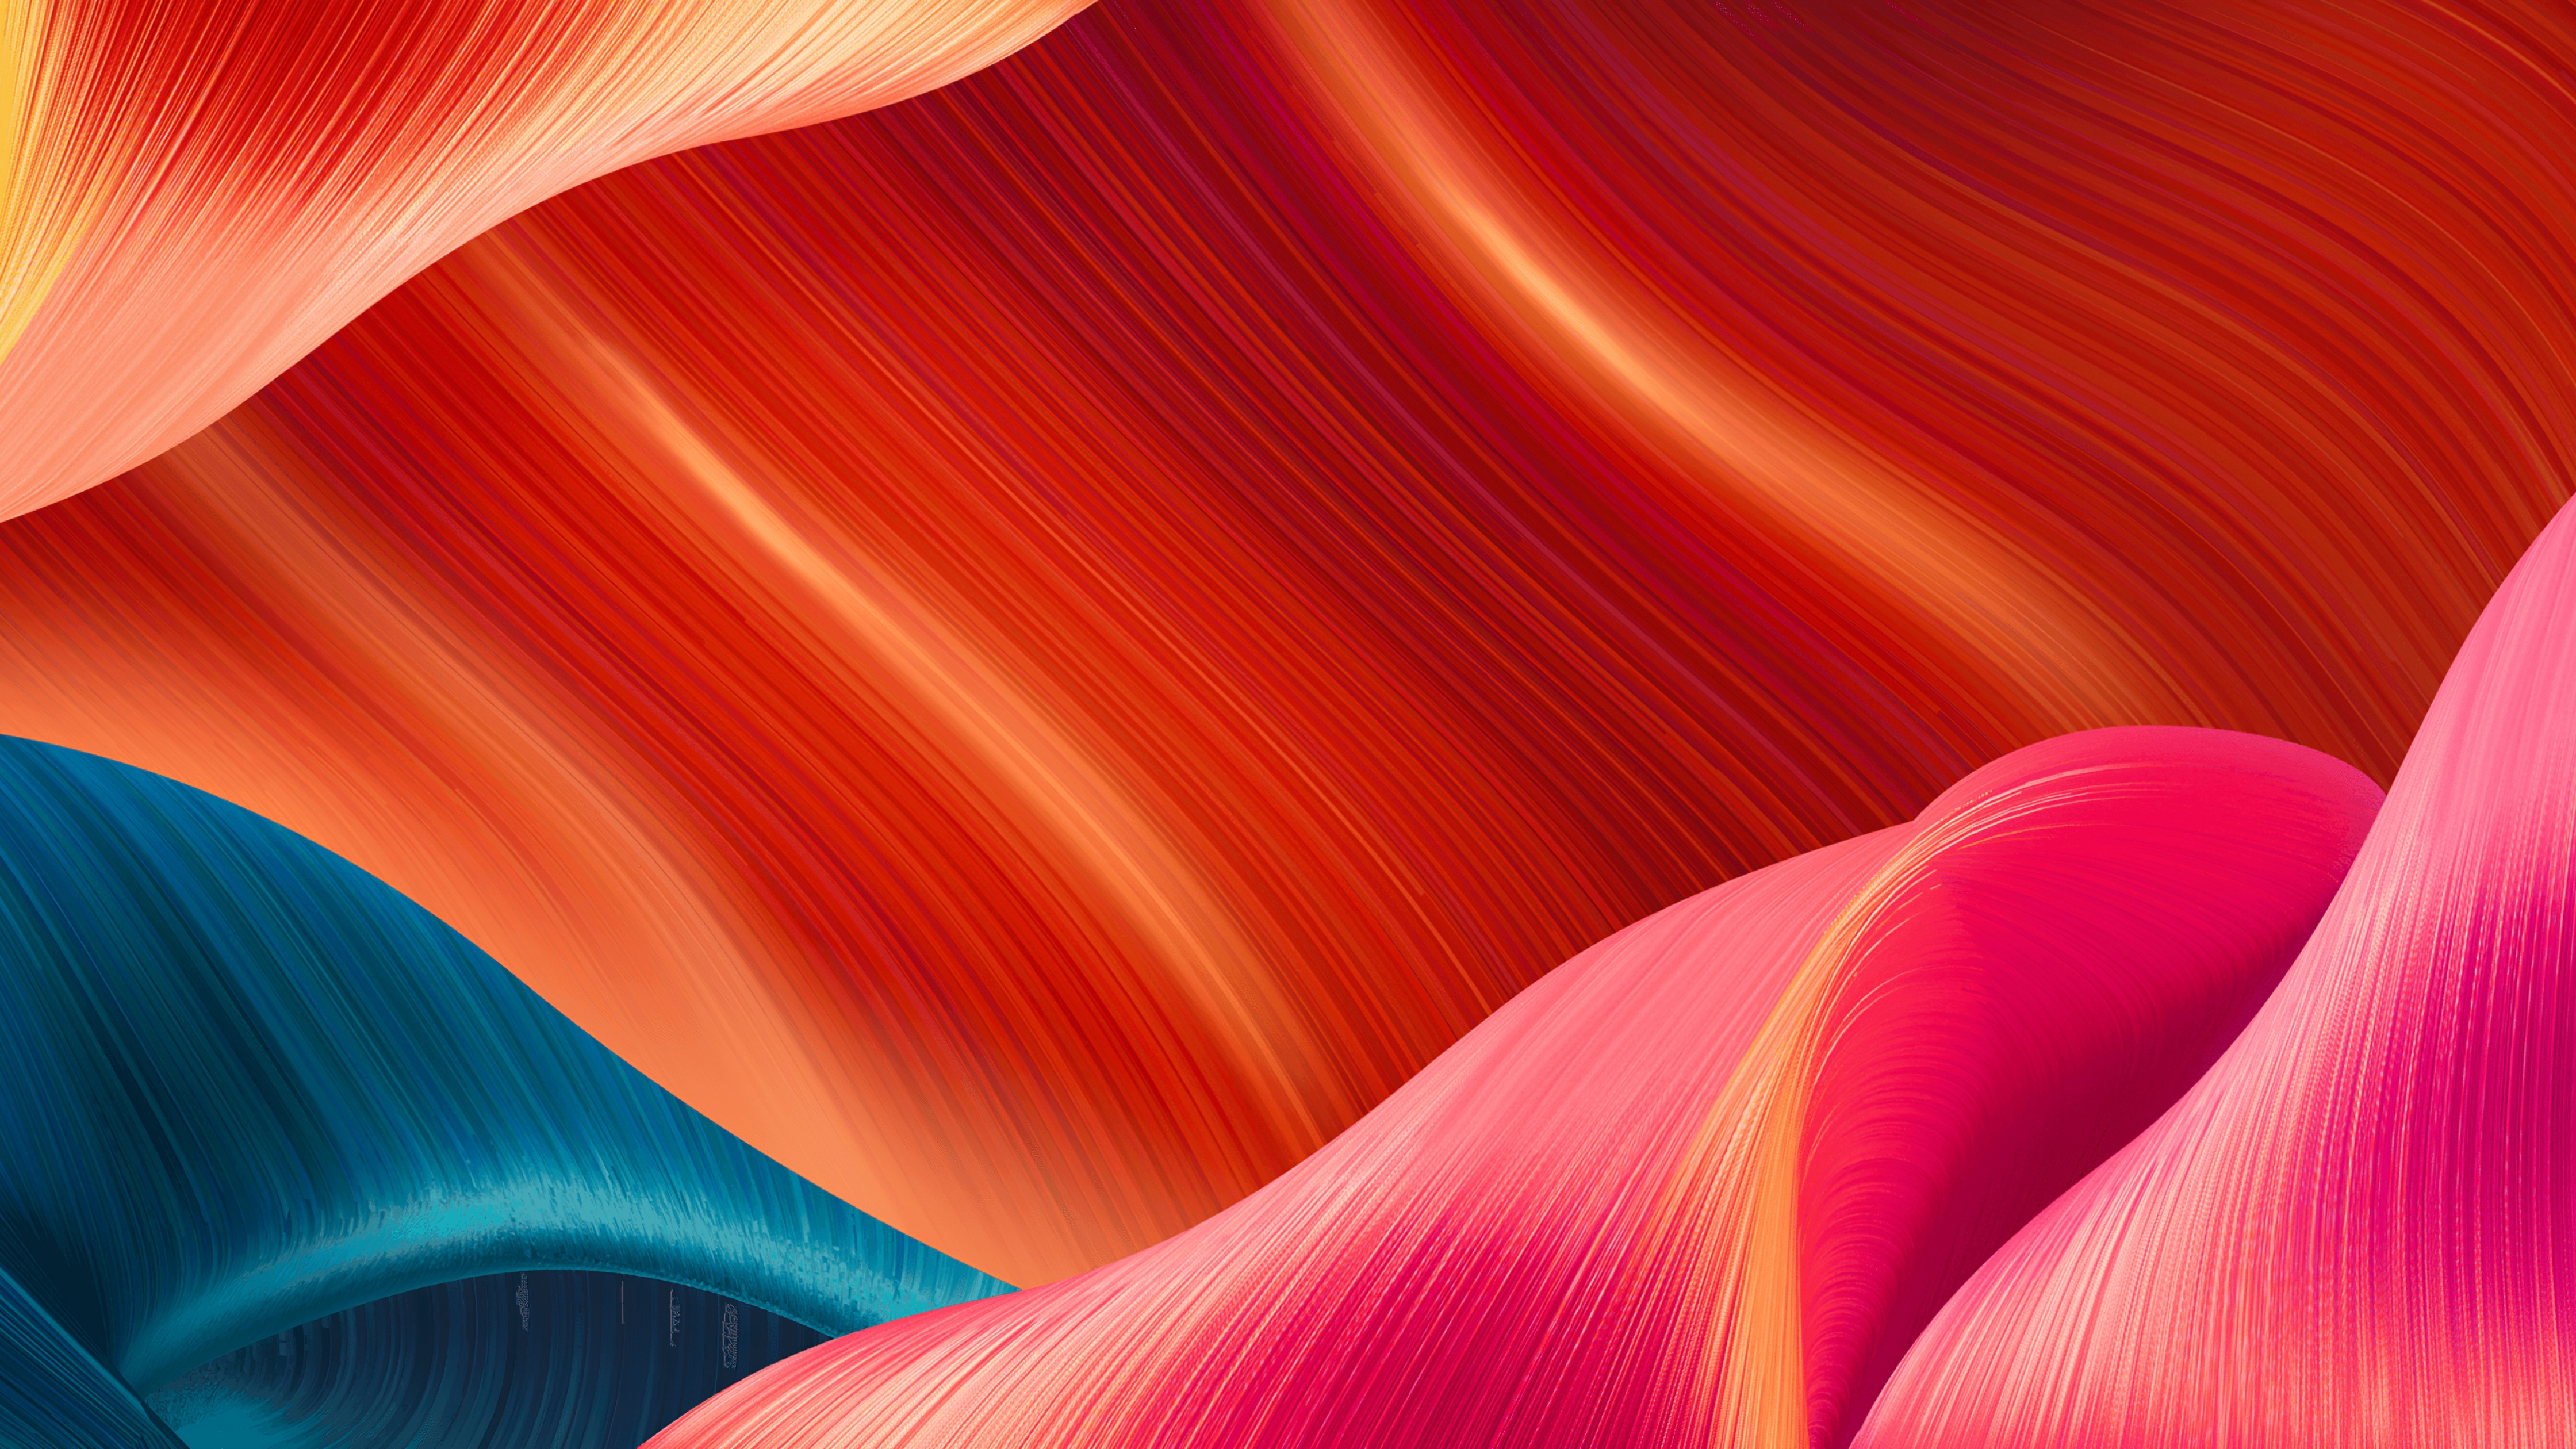 ColorOS Wallpaper 4K, Android Stock, Colorful background, Abstract